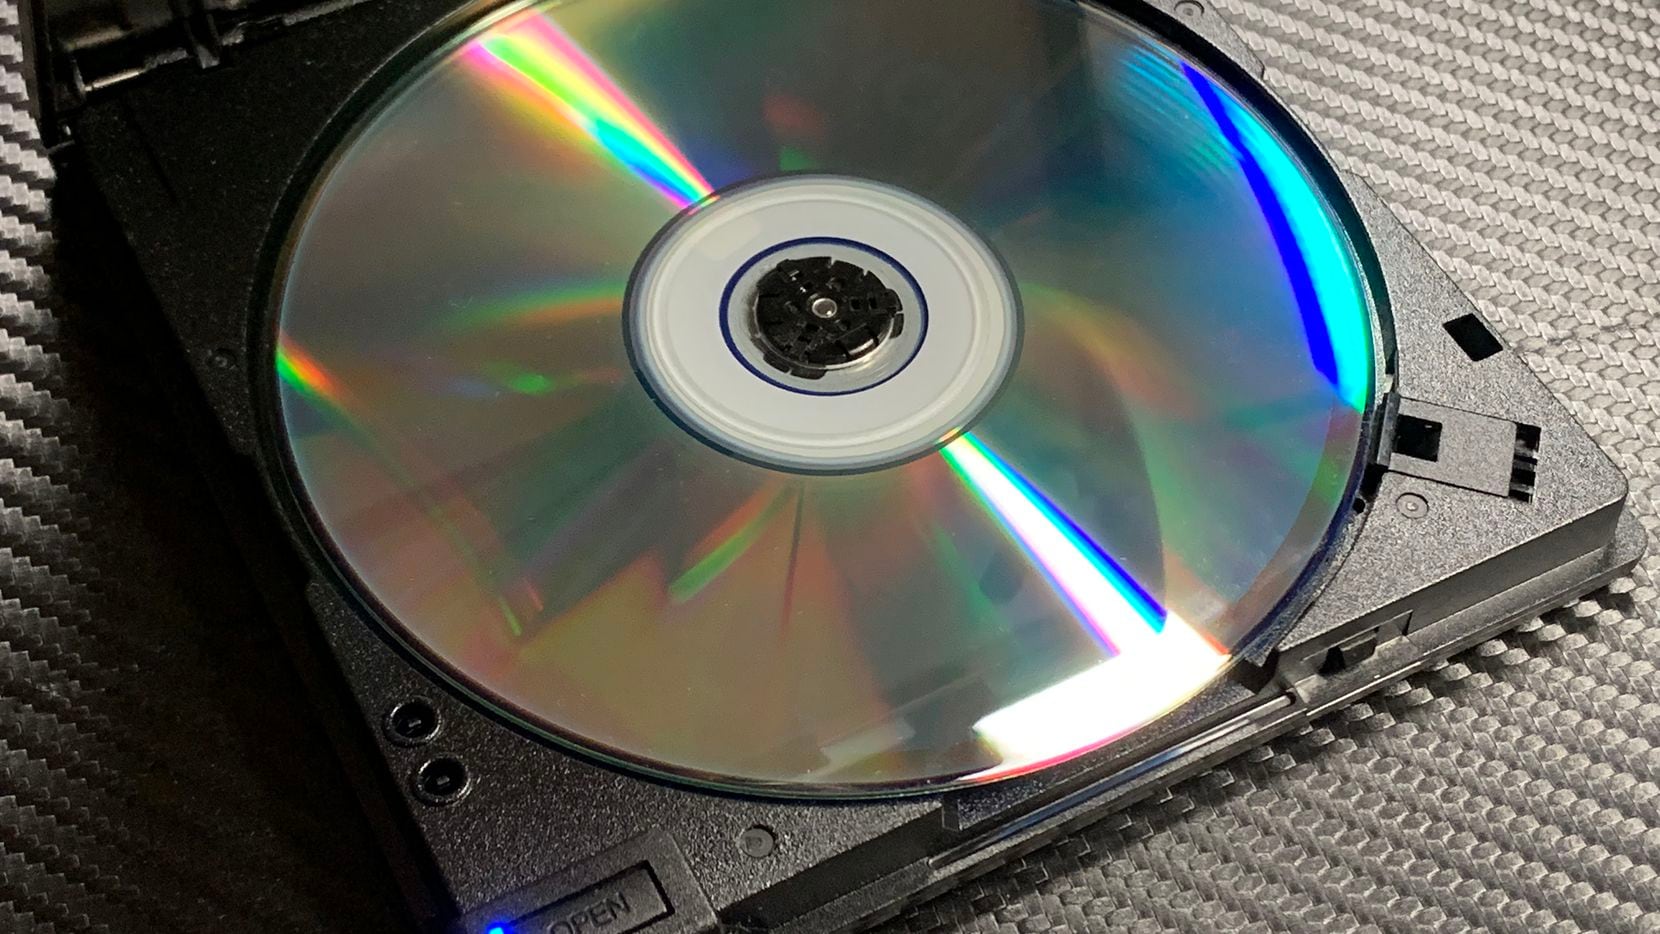 What exactly is 'ripping' a CD?